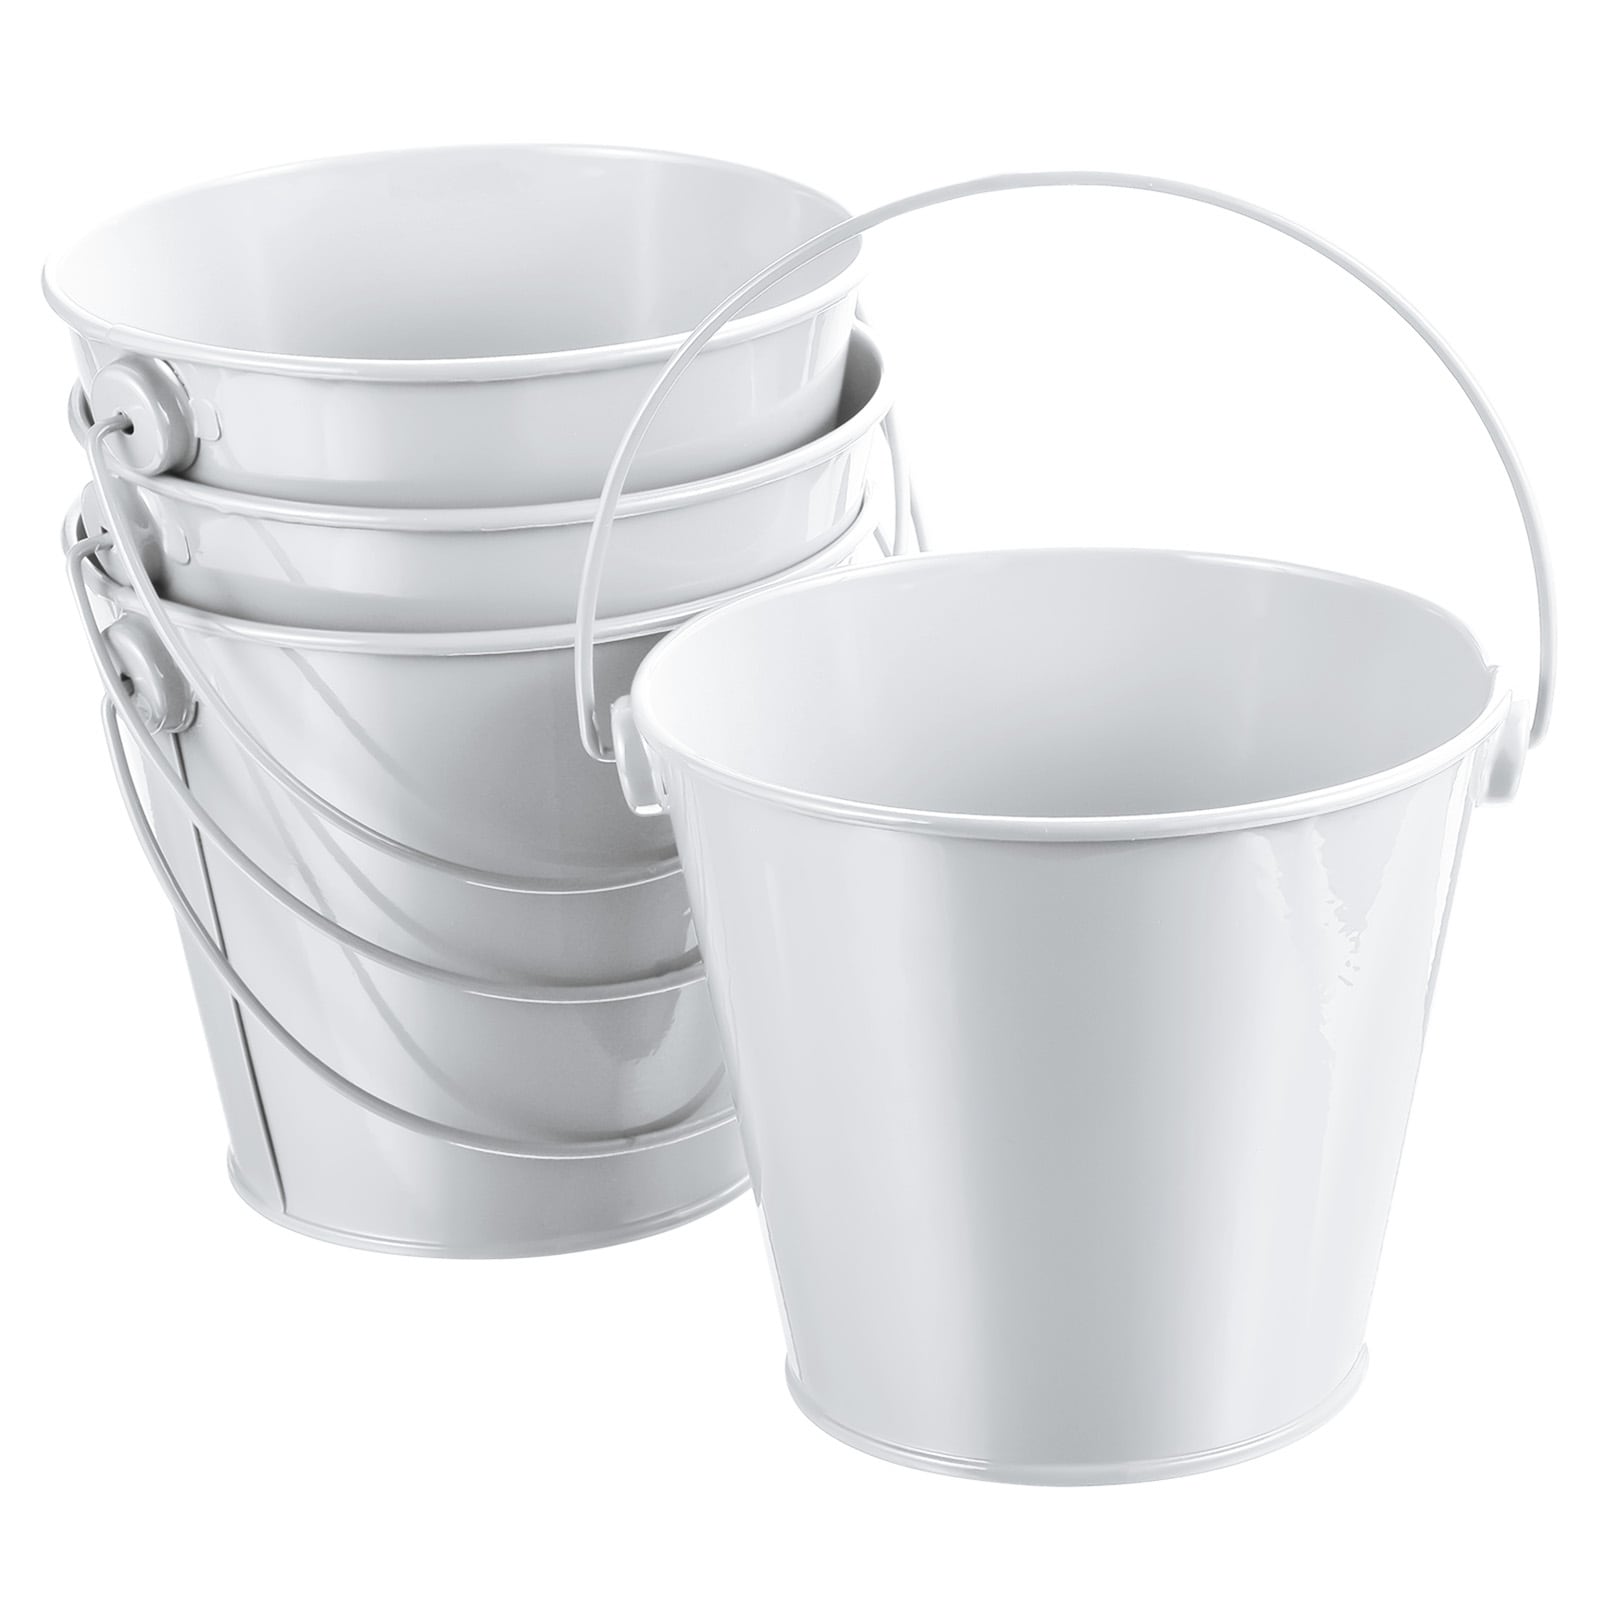 https://ak1.ostkcdn.com/images/products/is/images/direct/d0a7daa01a50375593f9cc02dcbffc4c65649e14/4Pcs-5%22x4%22-Small-Metal-Bucket-Colorful-Mini-Buckets-with-Handles-White.jpg